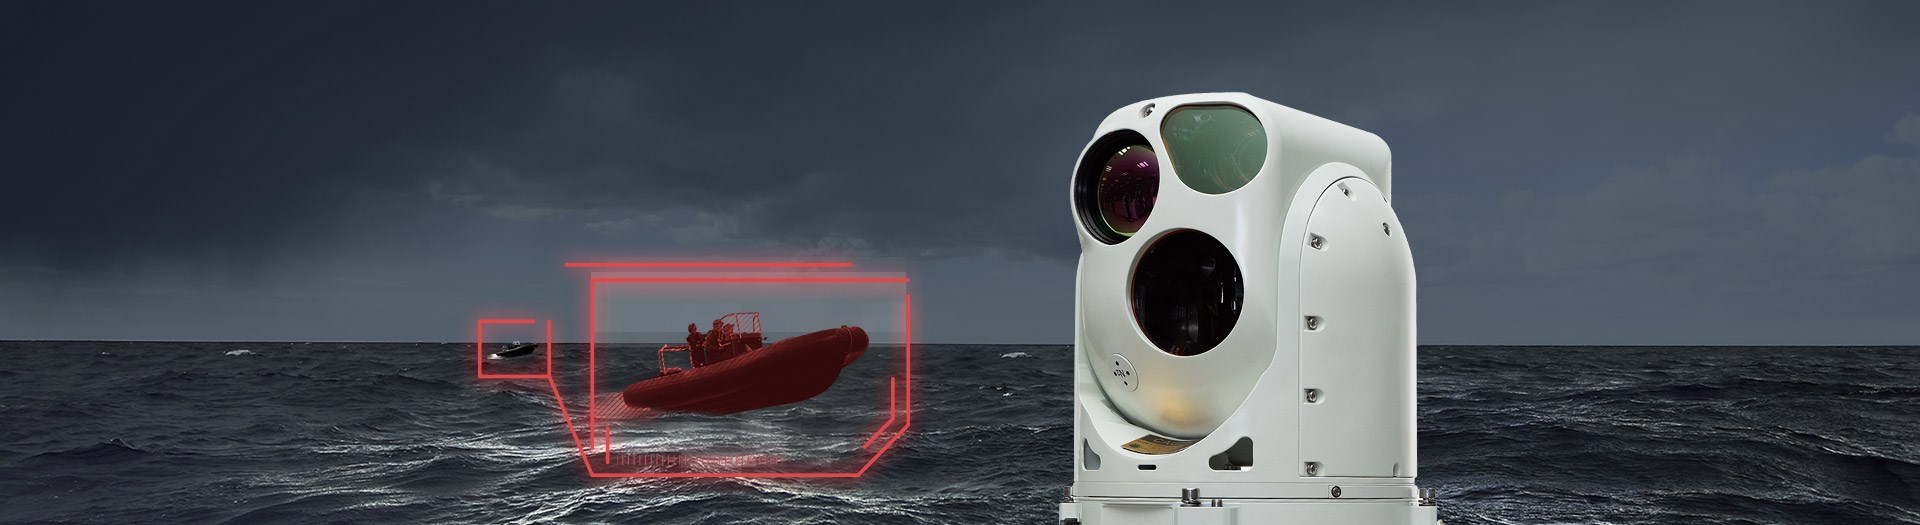 Sea Minipop Day Night Observation System For Maritime Applications Iai